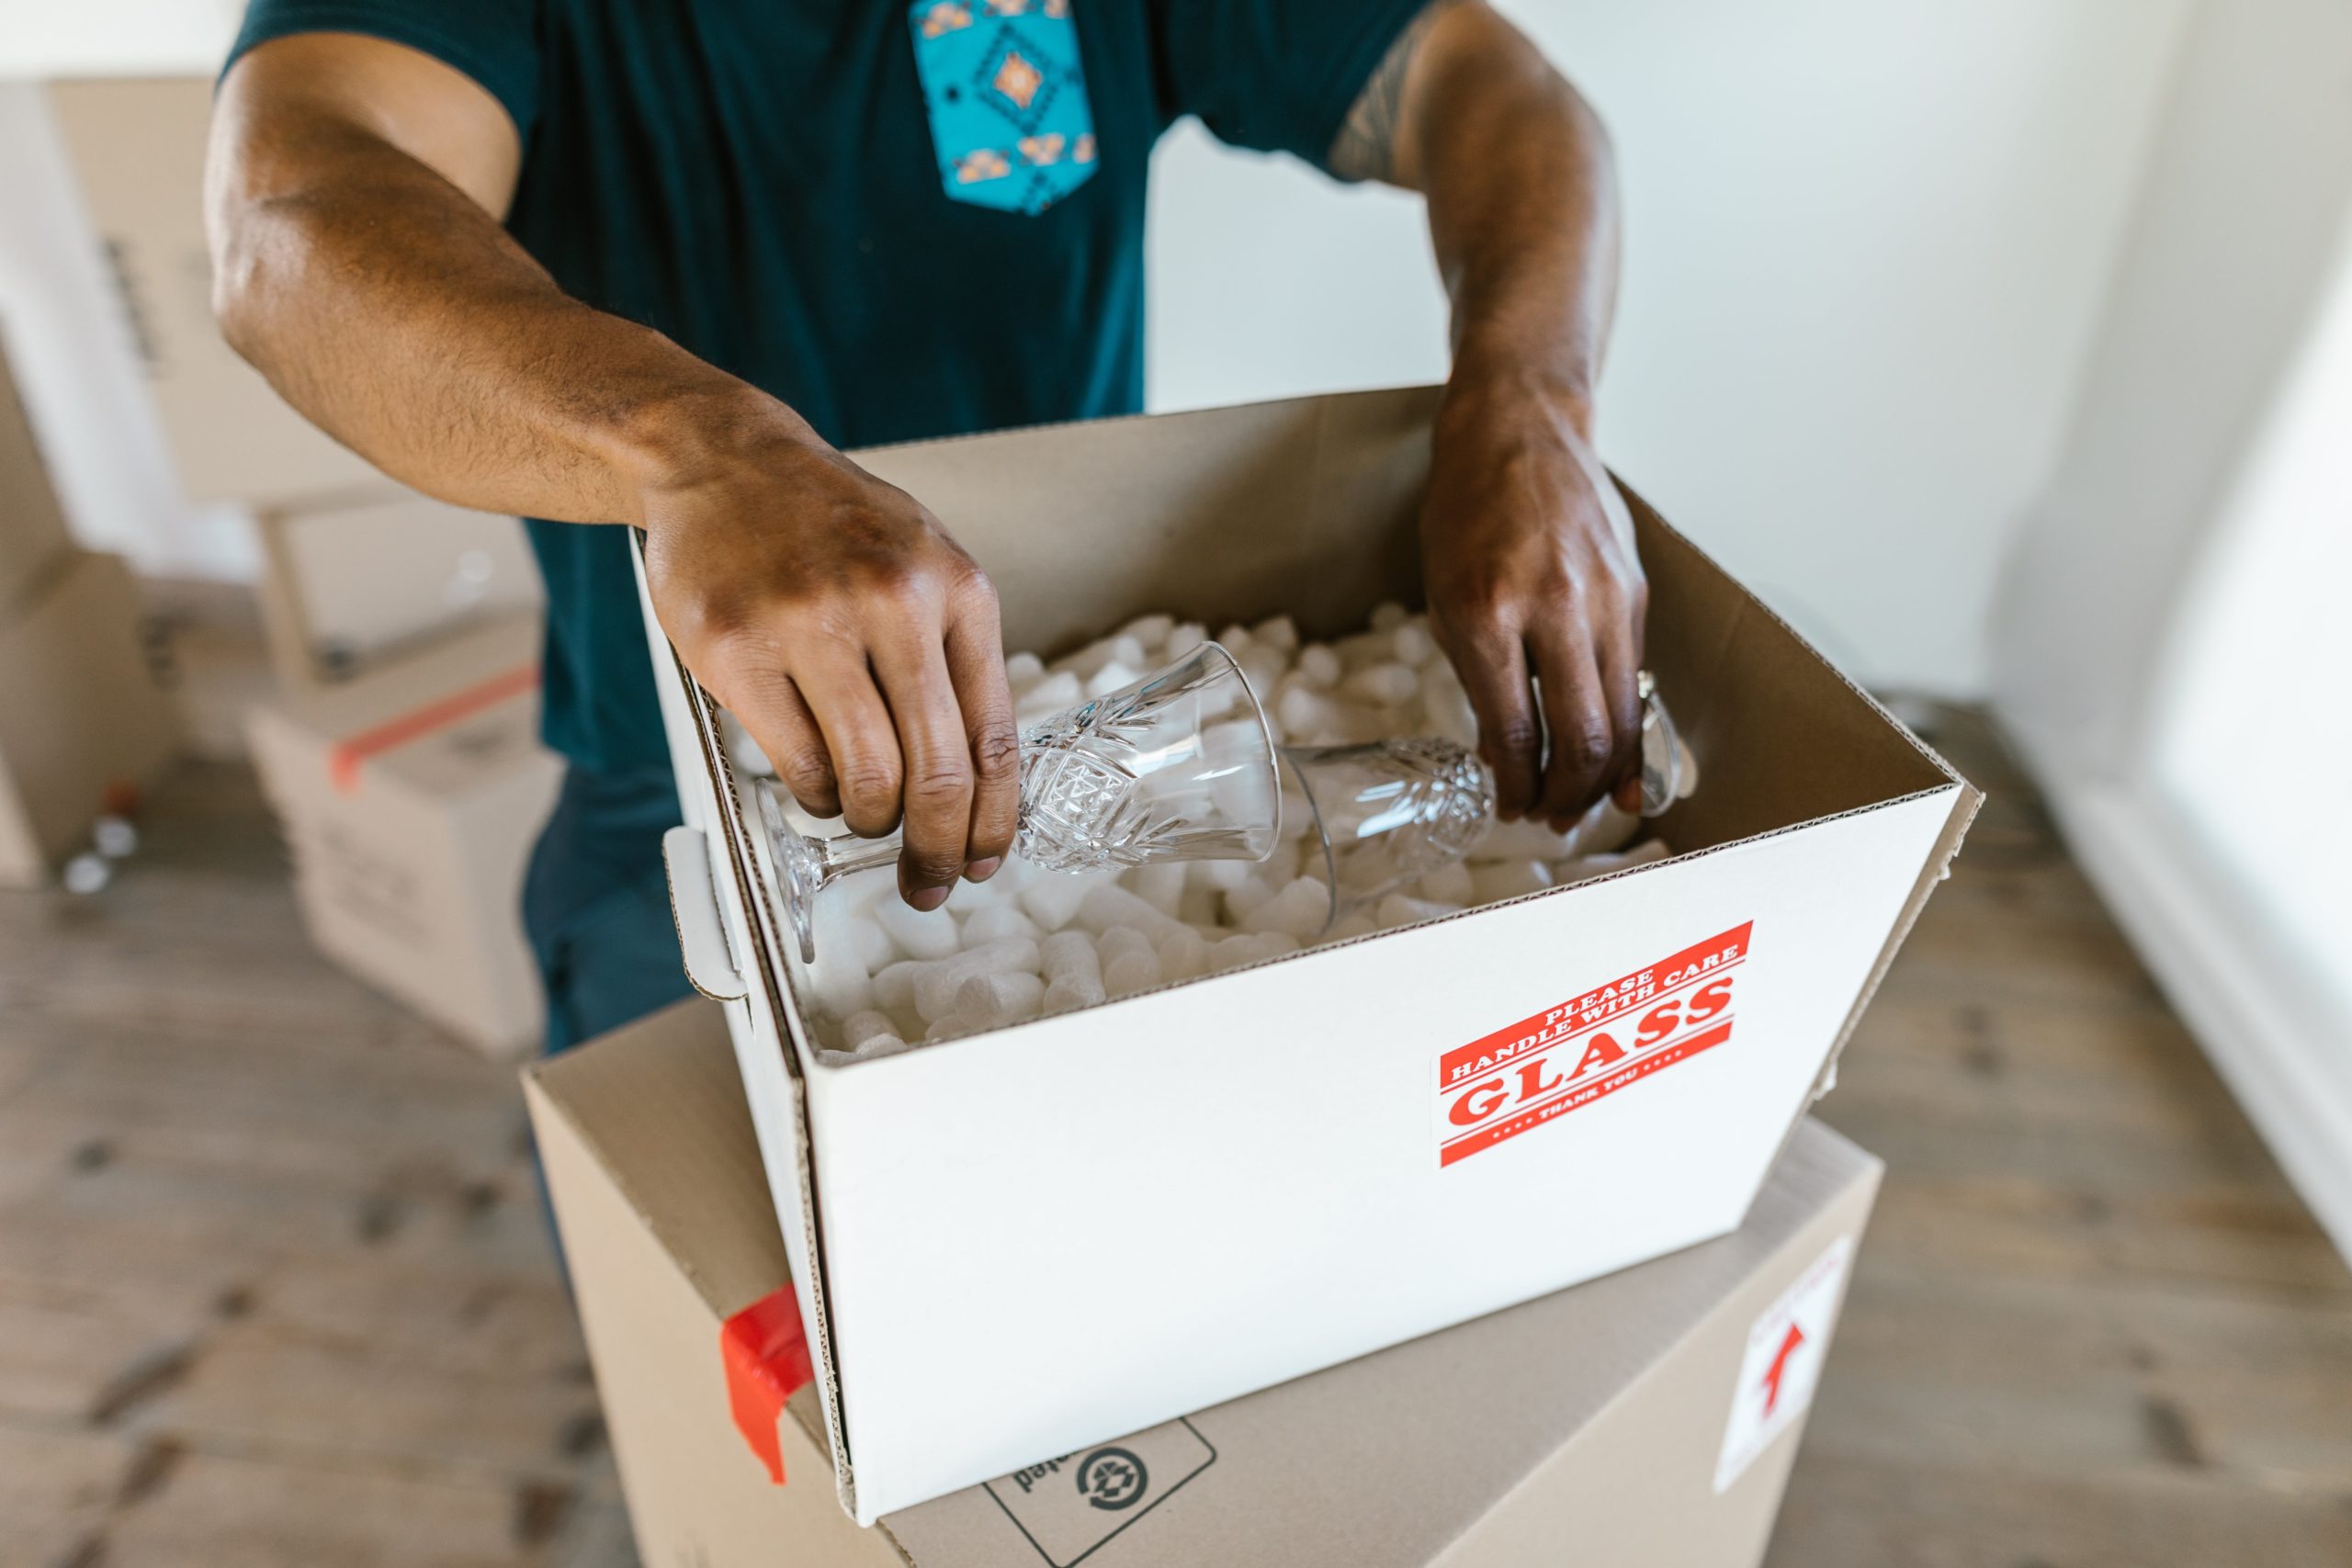 Packing fragile glass items in a box.